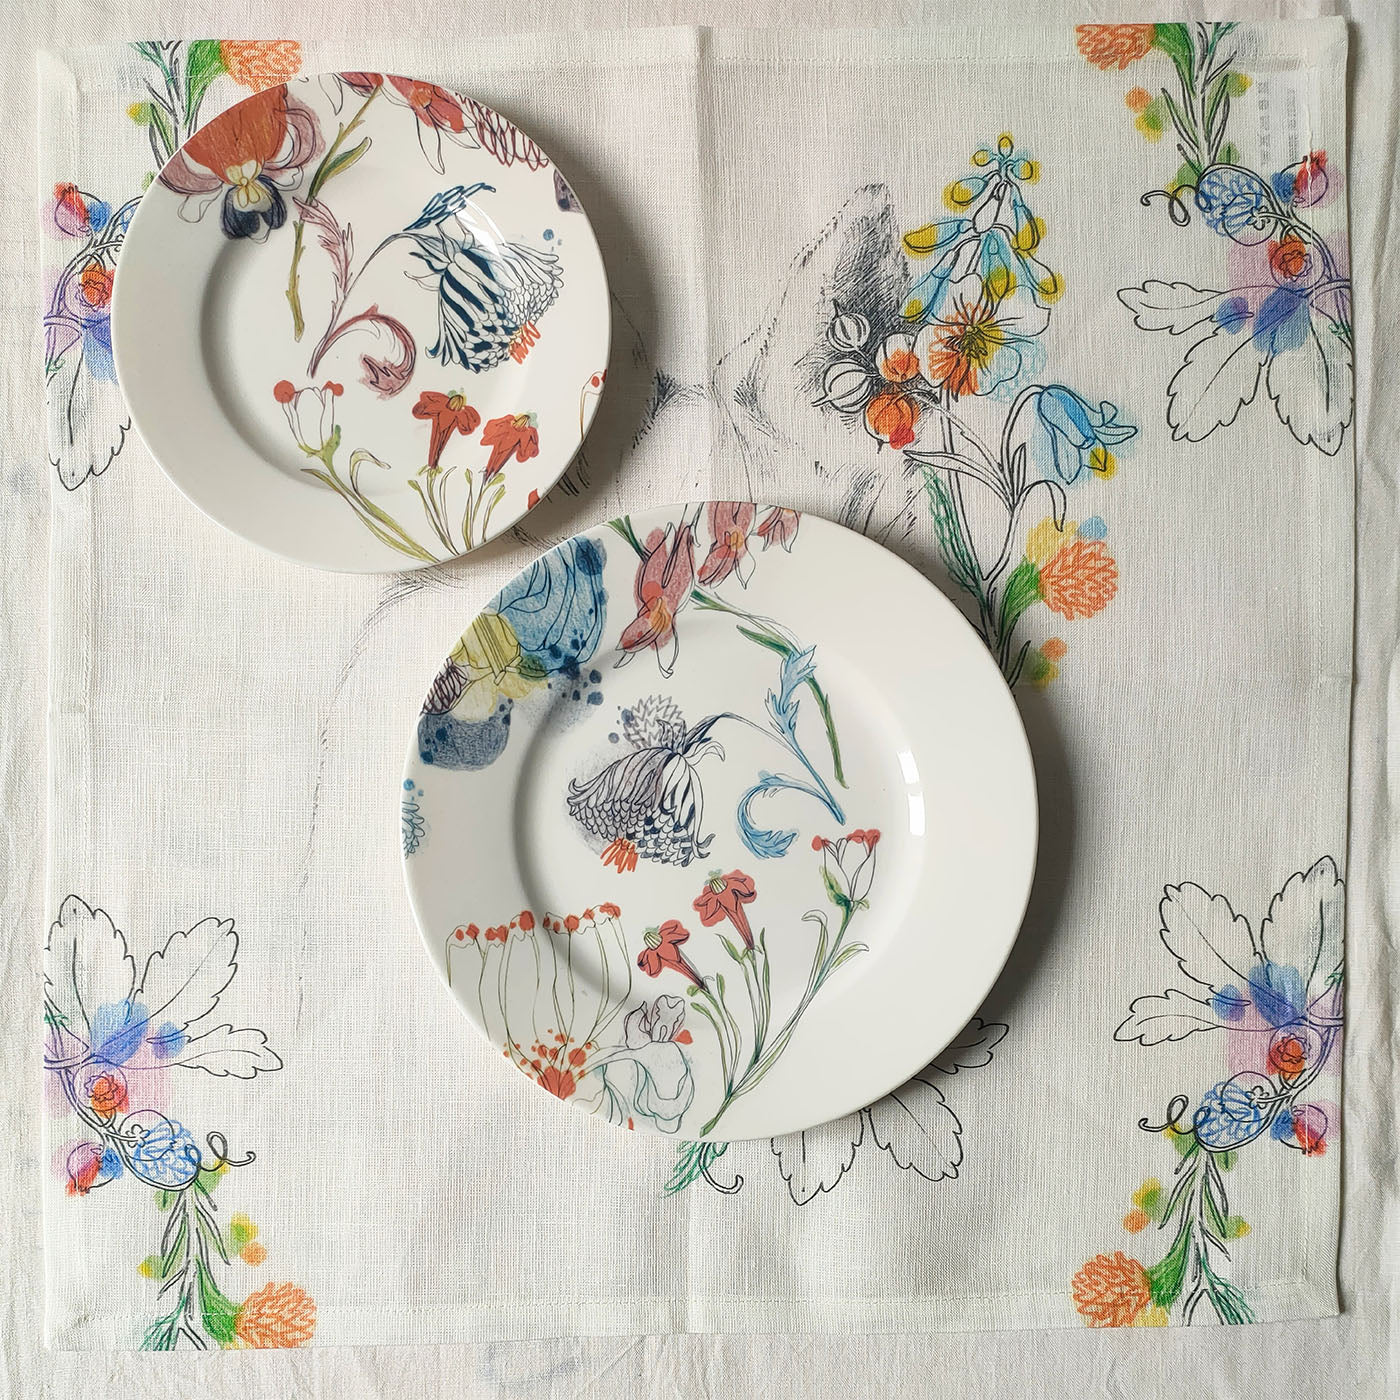 An Ode To The Woods Set of 4 Assorted Polychrome Placemats - Alternative view 5